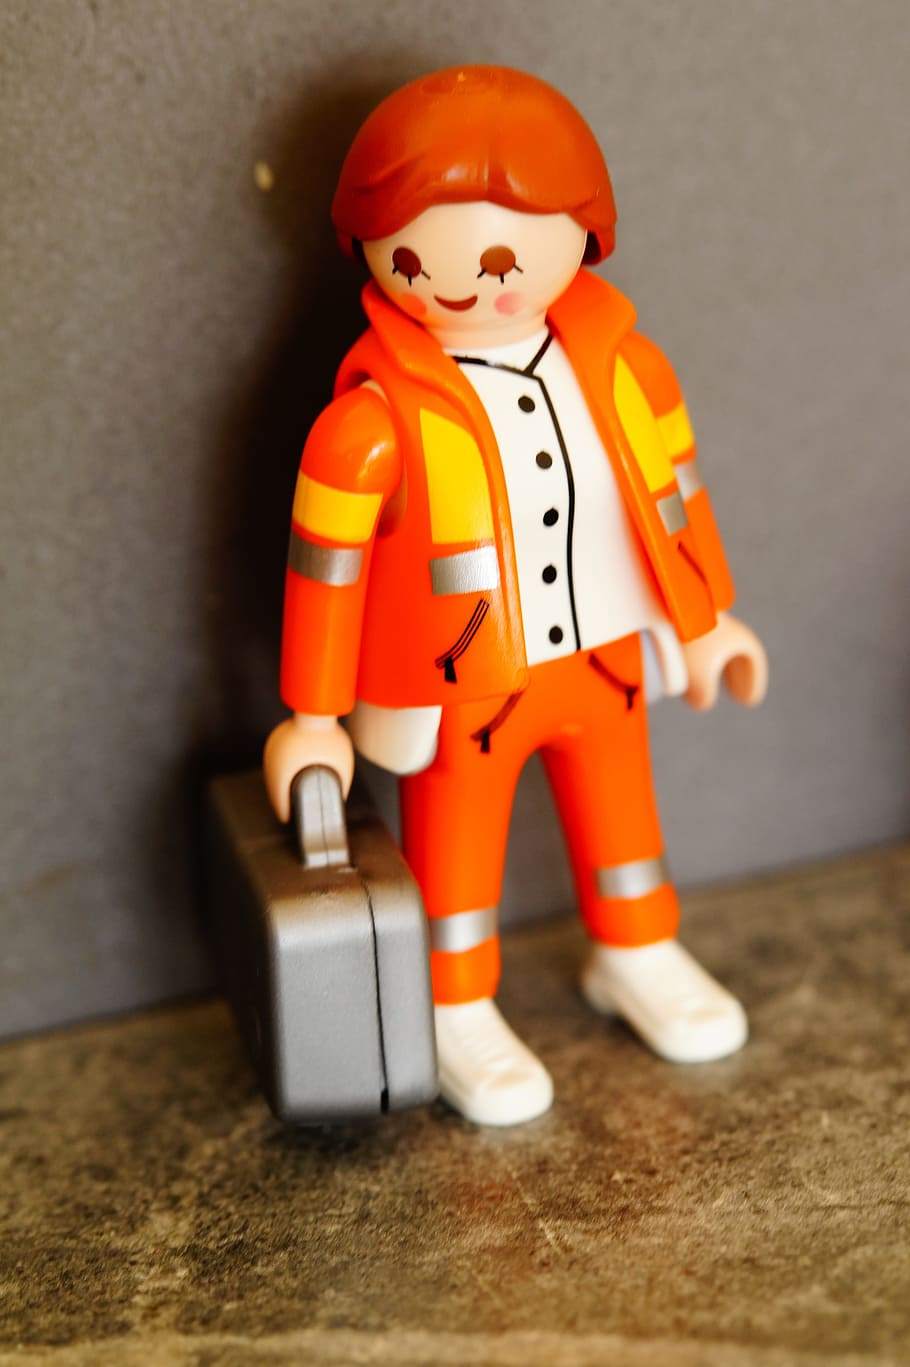 human, orange, suit toy, medic, paramedic, doctor on call, doctor, emergency, accident, ambulance